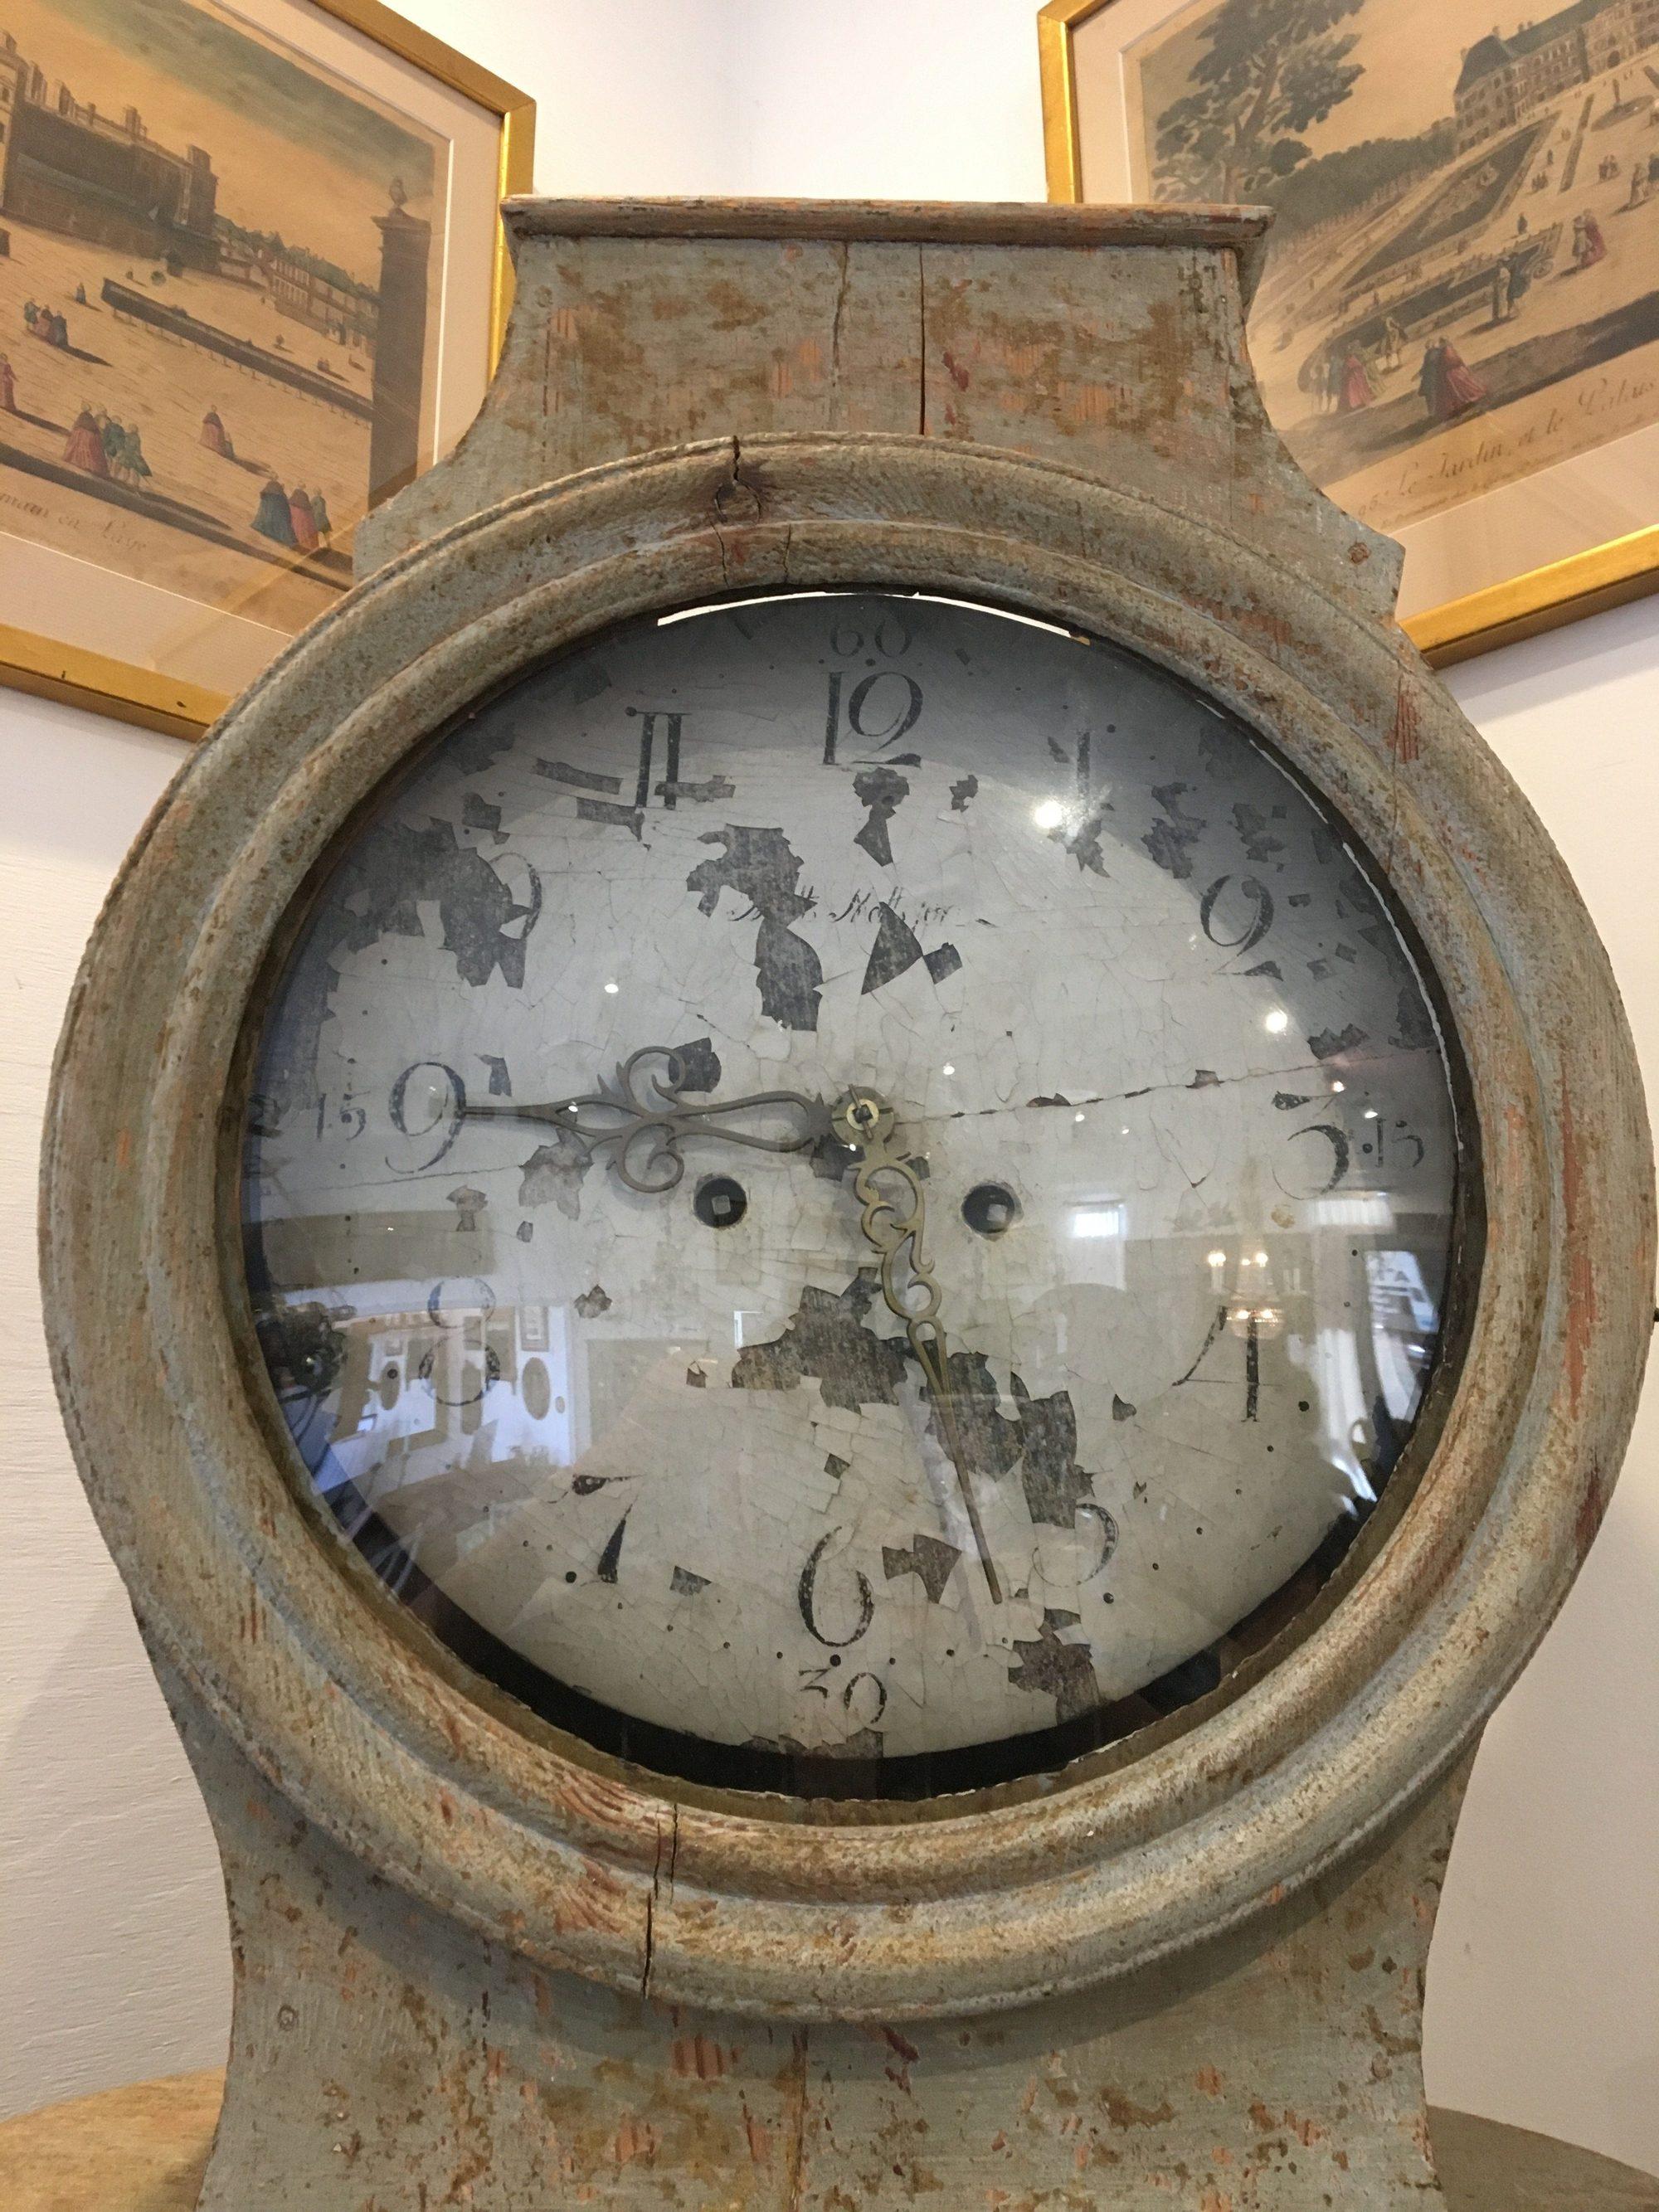 Gustavian Swedish columnar clock, 18th century, original grey-green-white paint, works, face. This beautiful and rare form grandfather clock, a variation on the Mora clock. Its column body is comprised of three parts plus the removable works case.